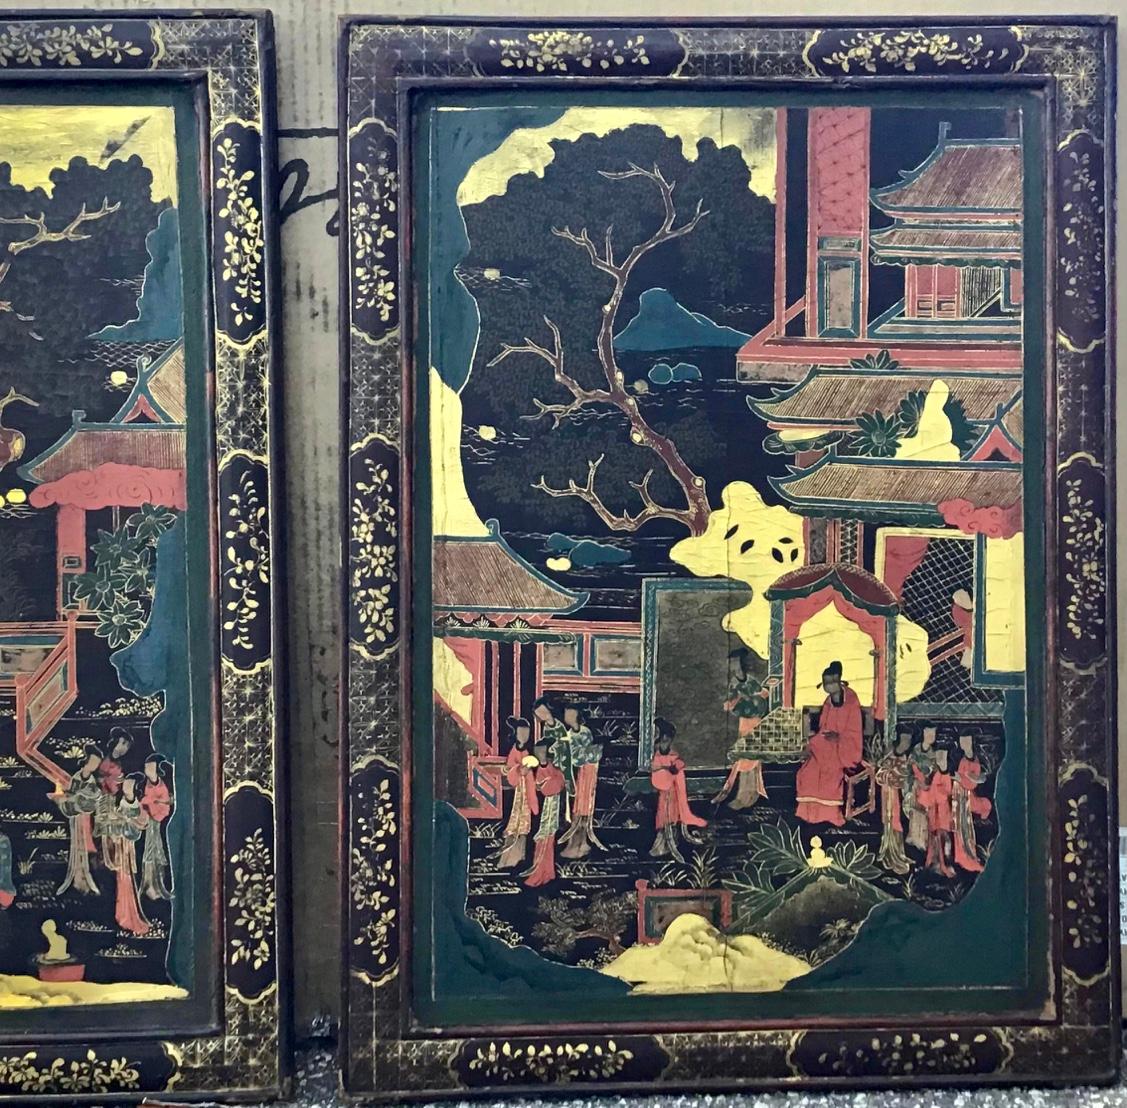 Pair of stylish Chinoiserie panels in a lacquer finish, painted in gold, red & black with landscapes with village and people. The frame also decorated with wonderful gilt detailed design. 19th Century, Chinese.